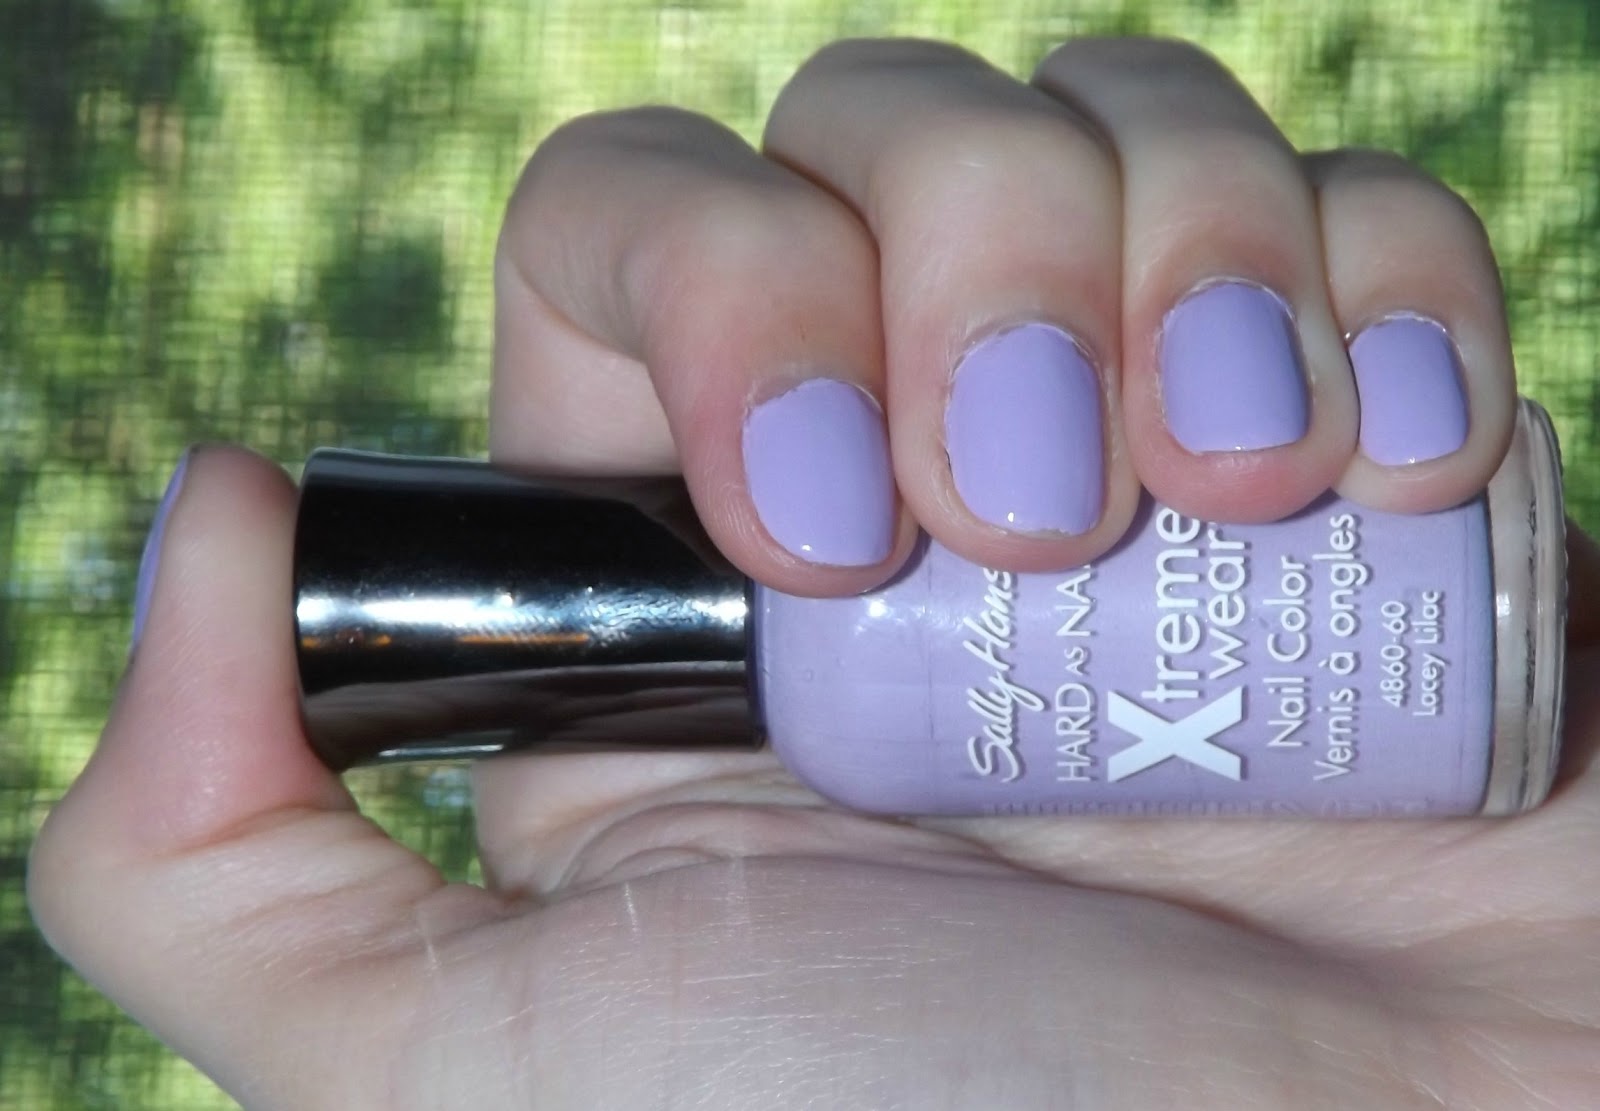 3. Sally Hansen To Be Perfectly Honest Nail Color - wide 2